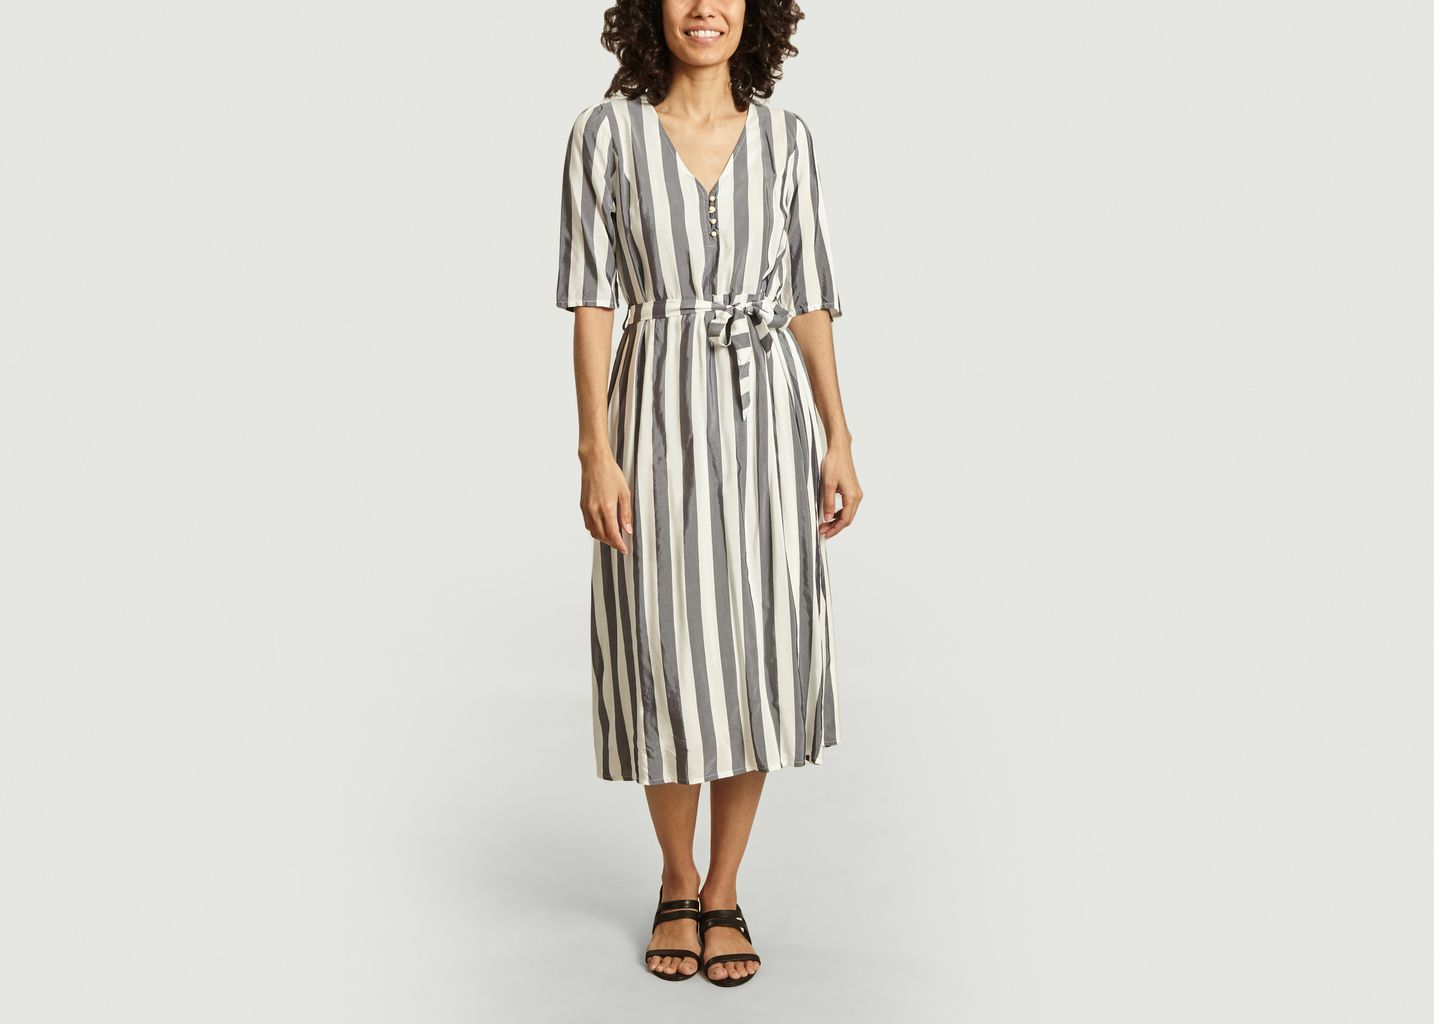 Striped belted dress Odessa Bungalow - Tinsels